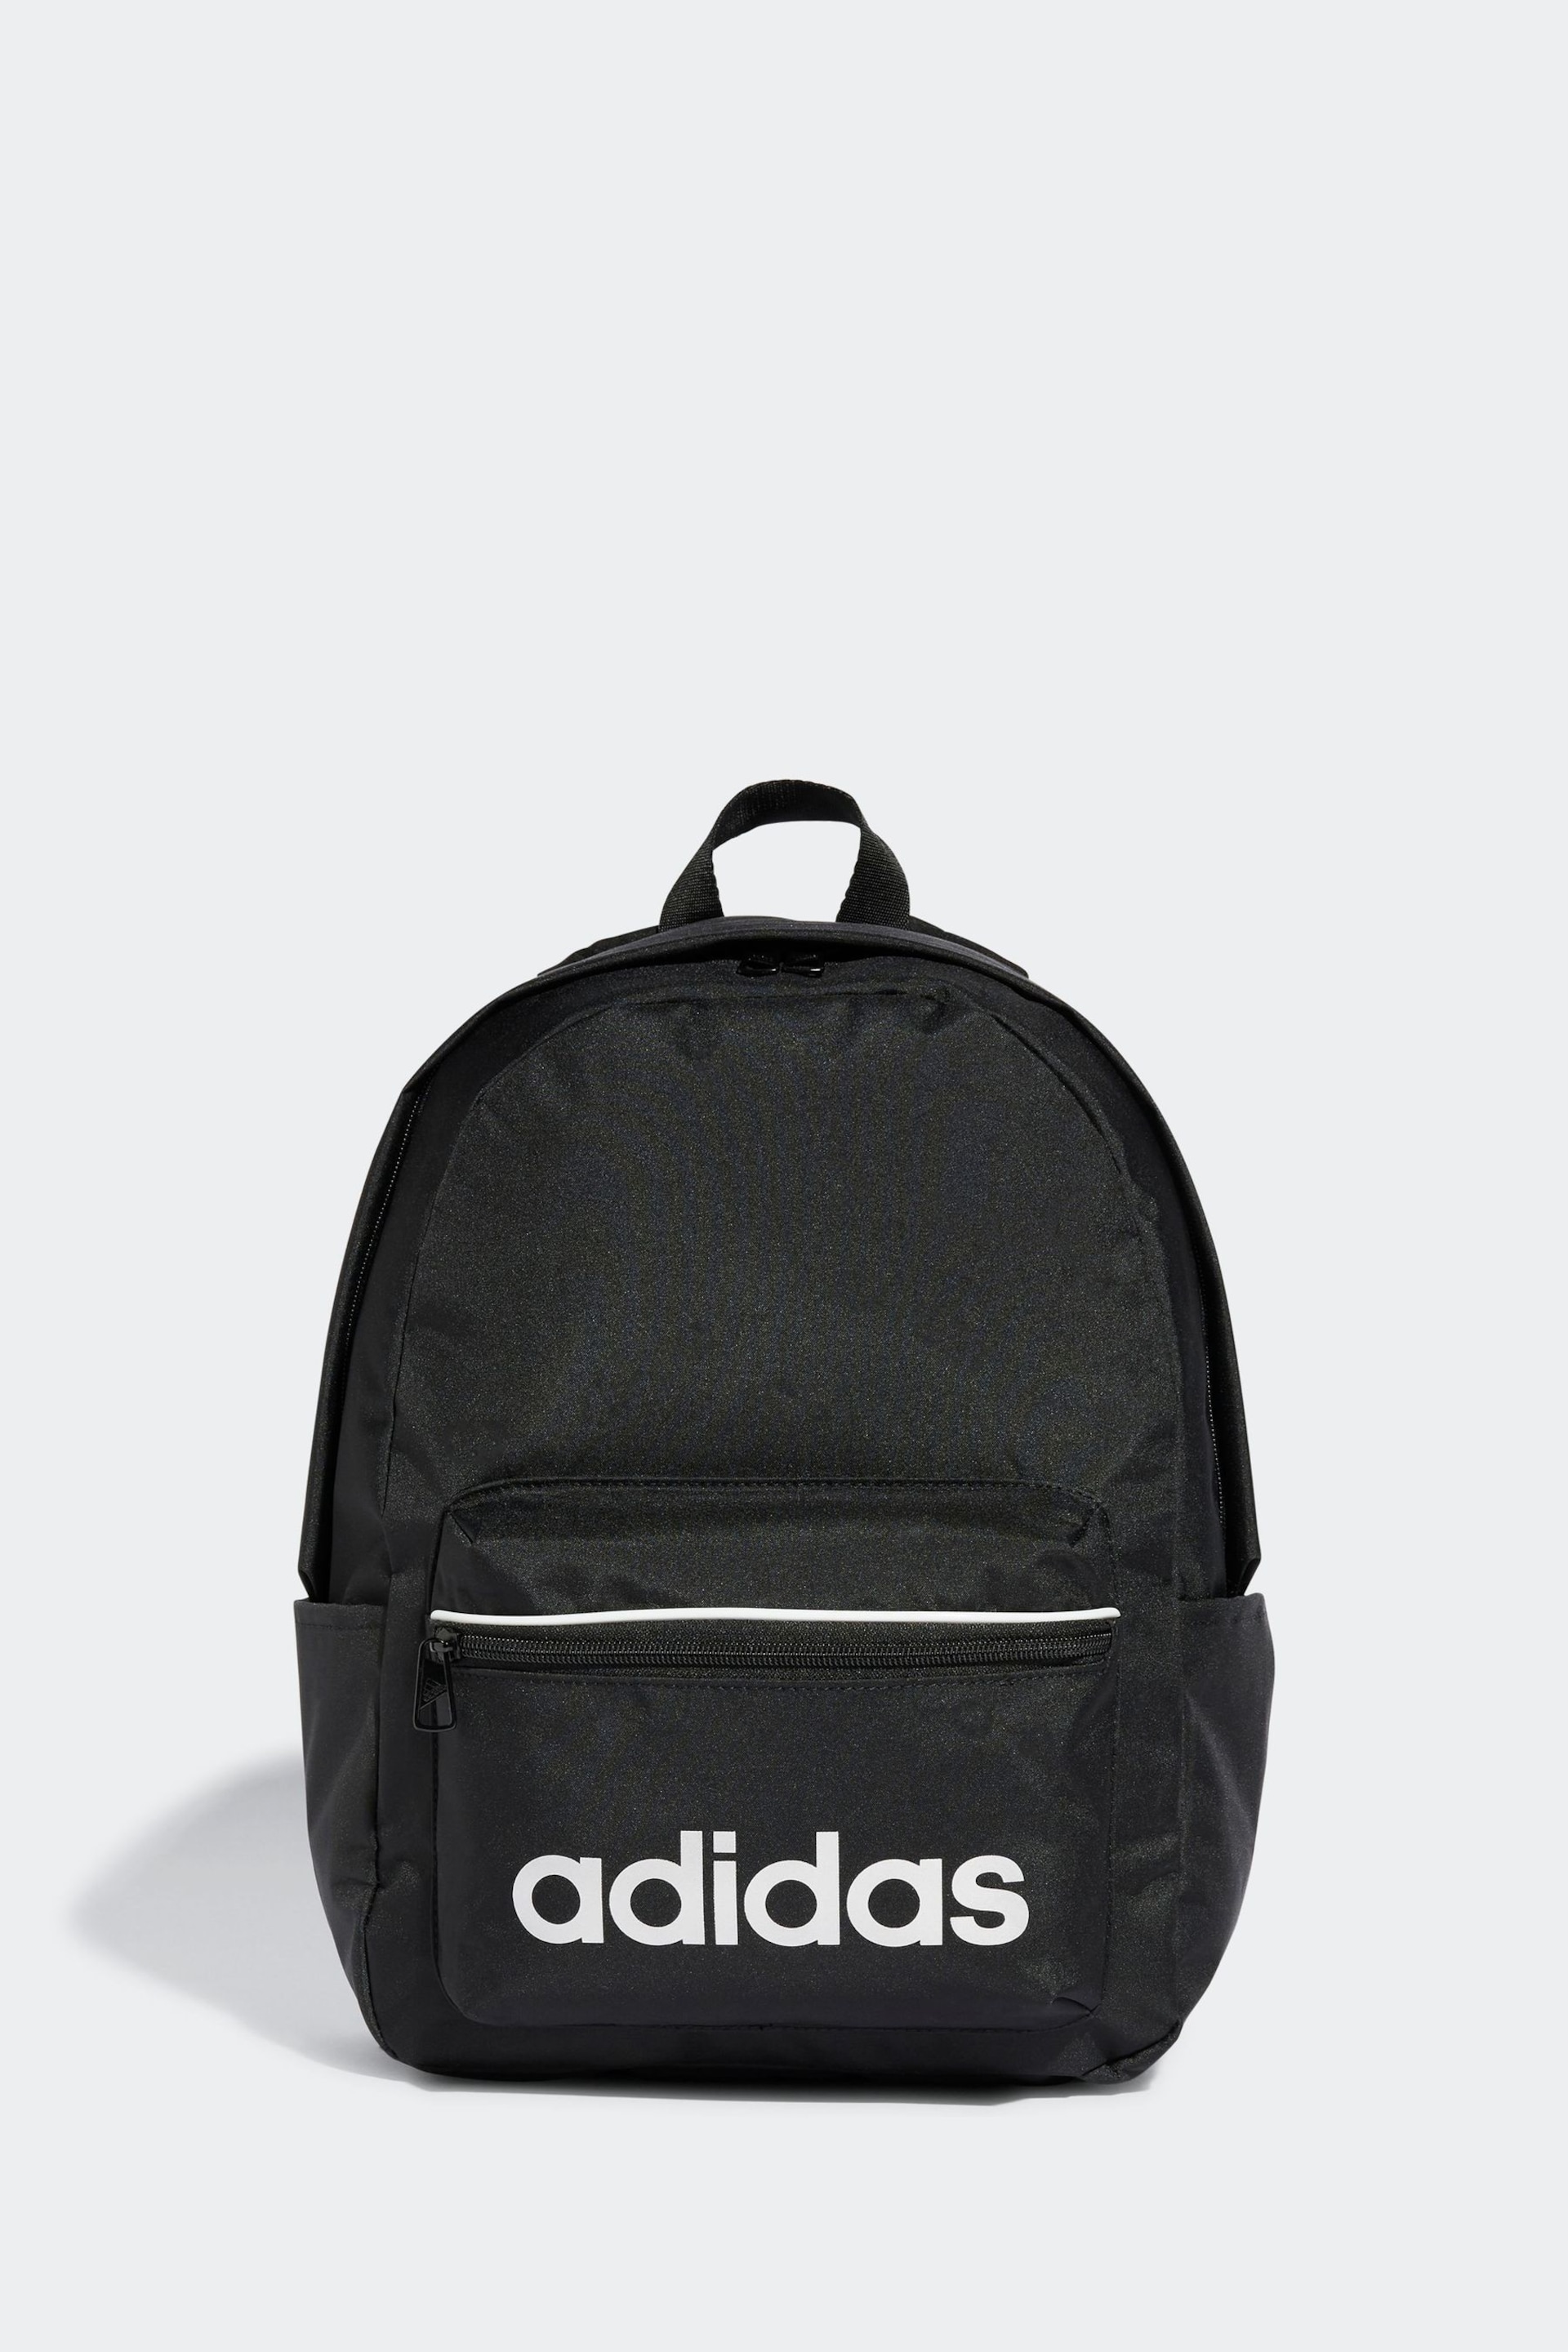 adidas Black Linear Essentials Backpack - Image 1 of 3